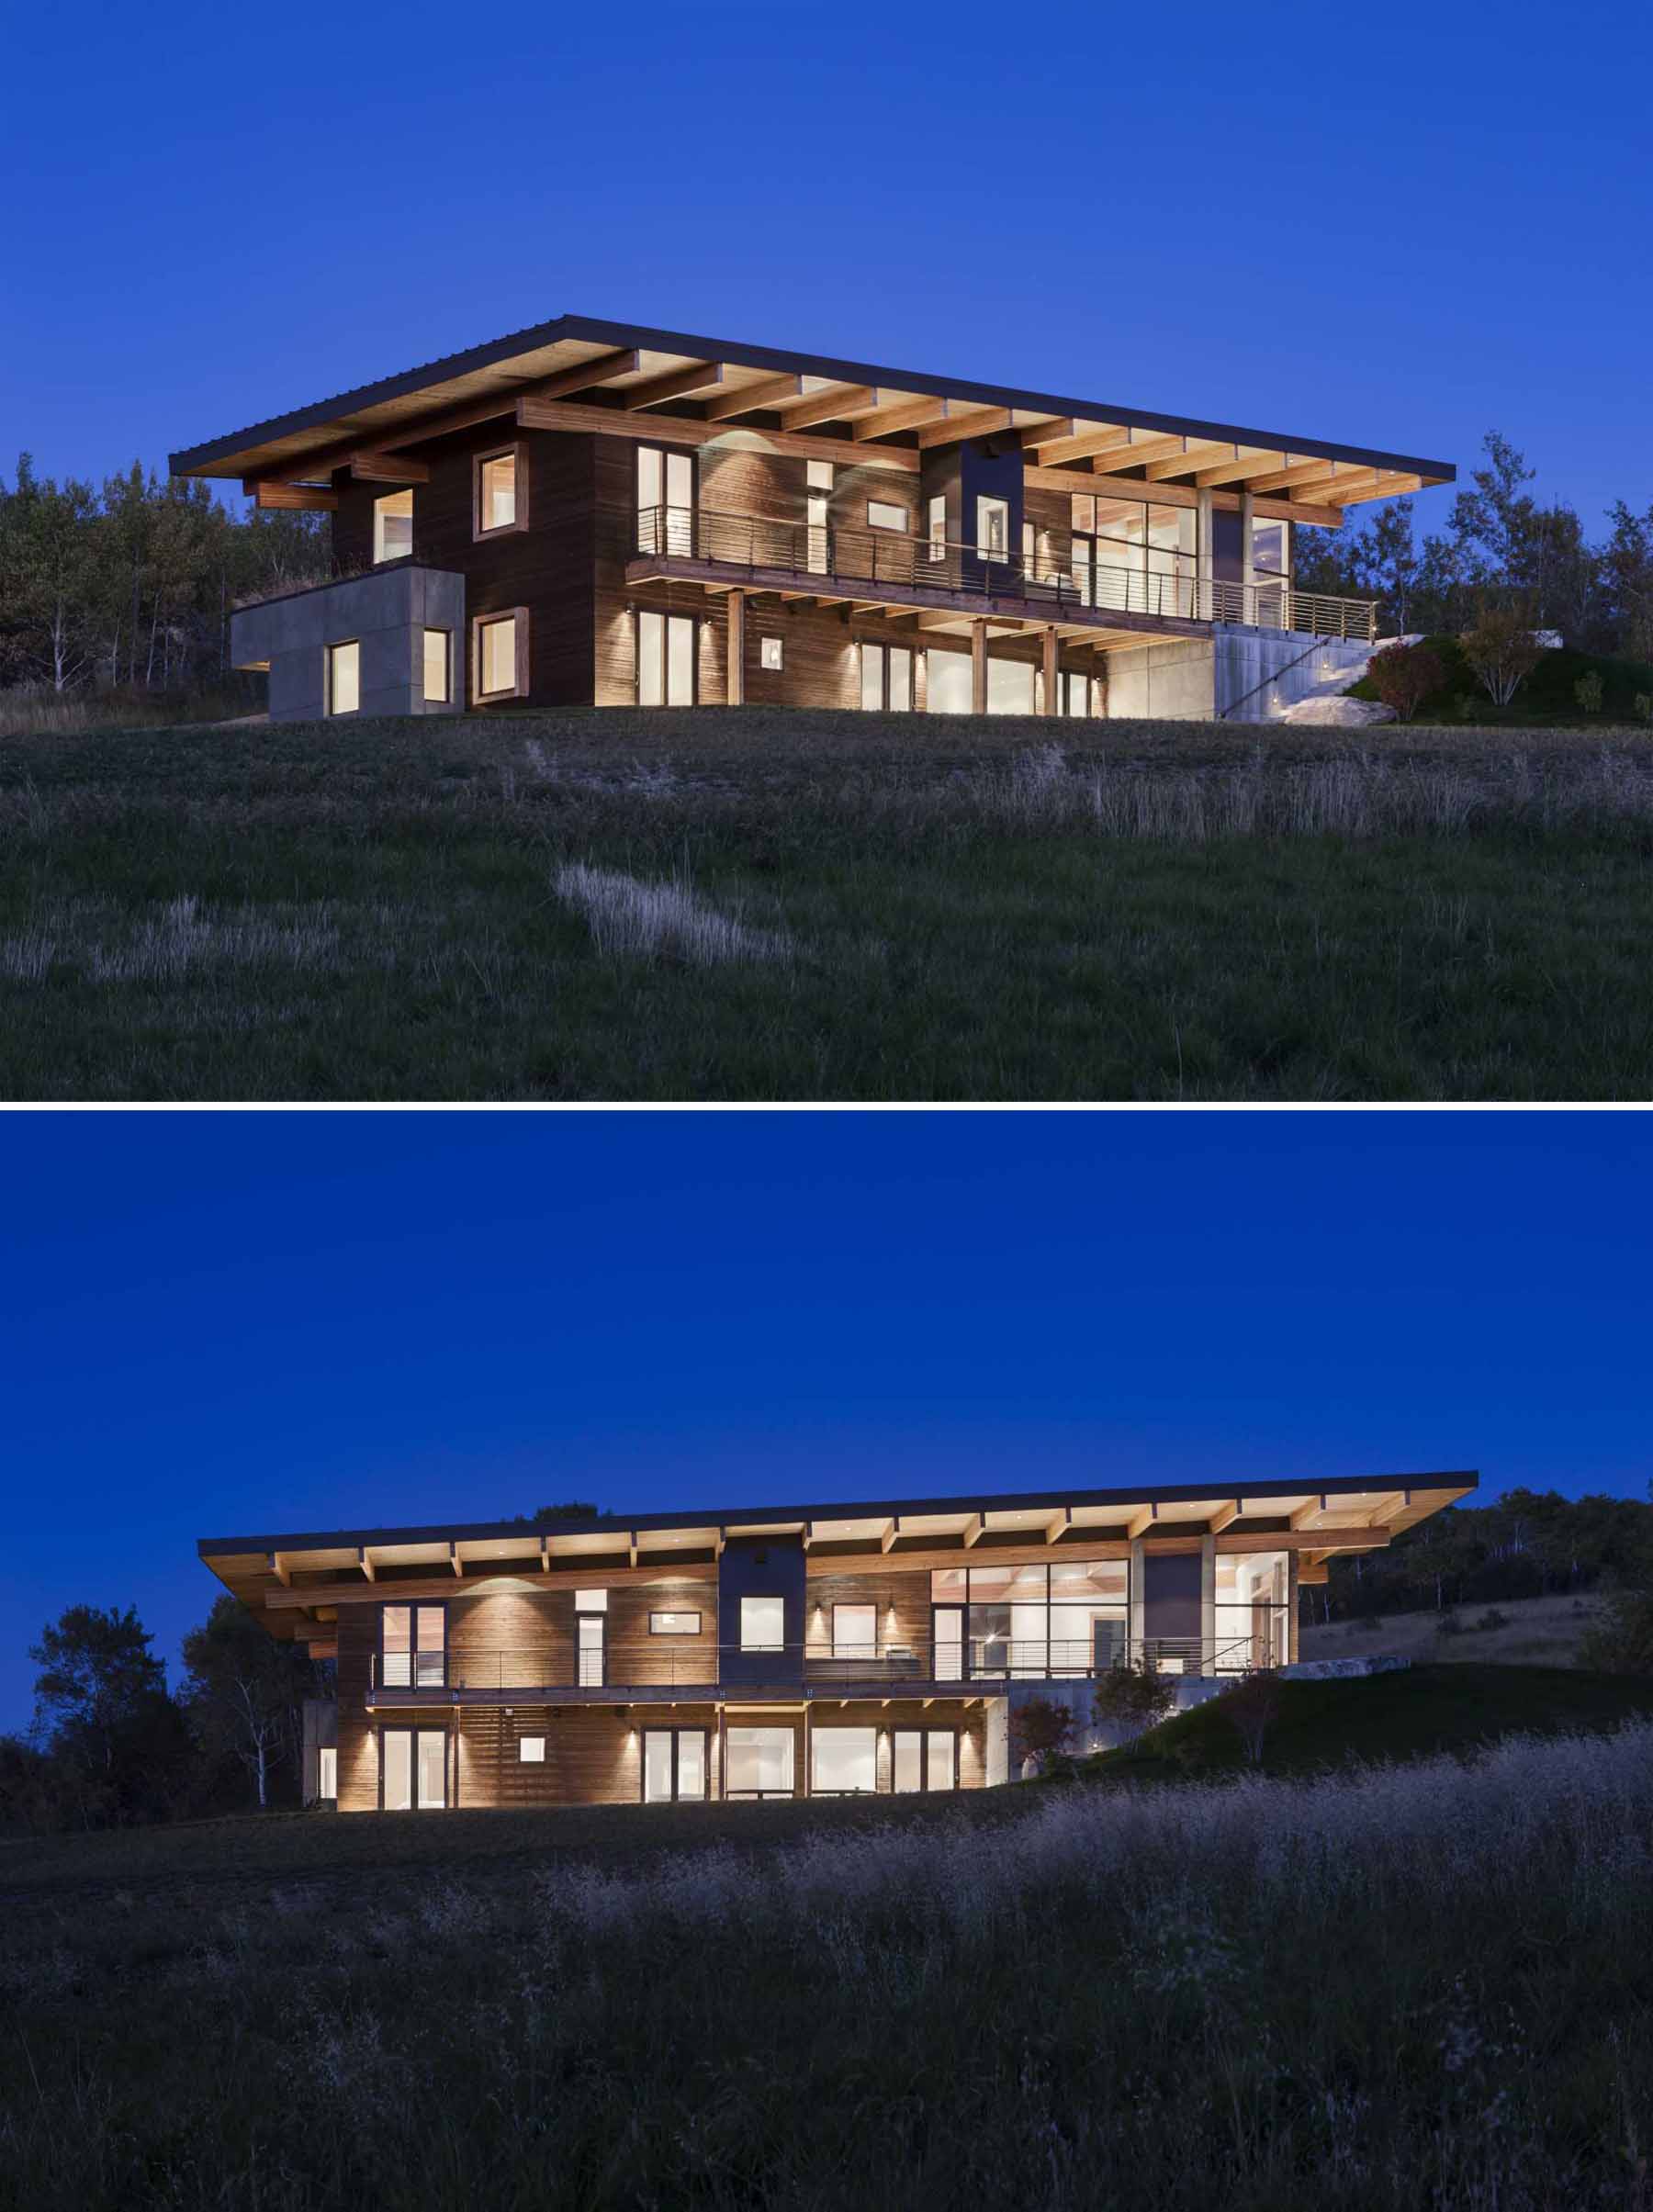 A modern post and beam house with wood siding.